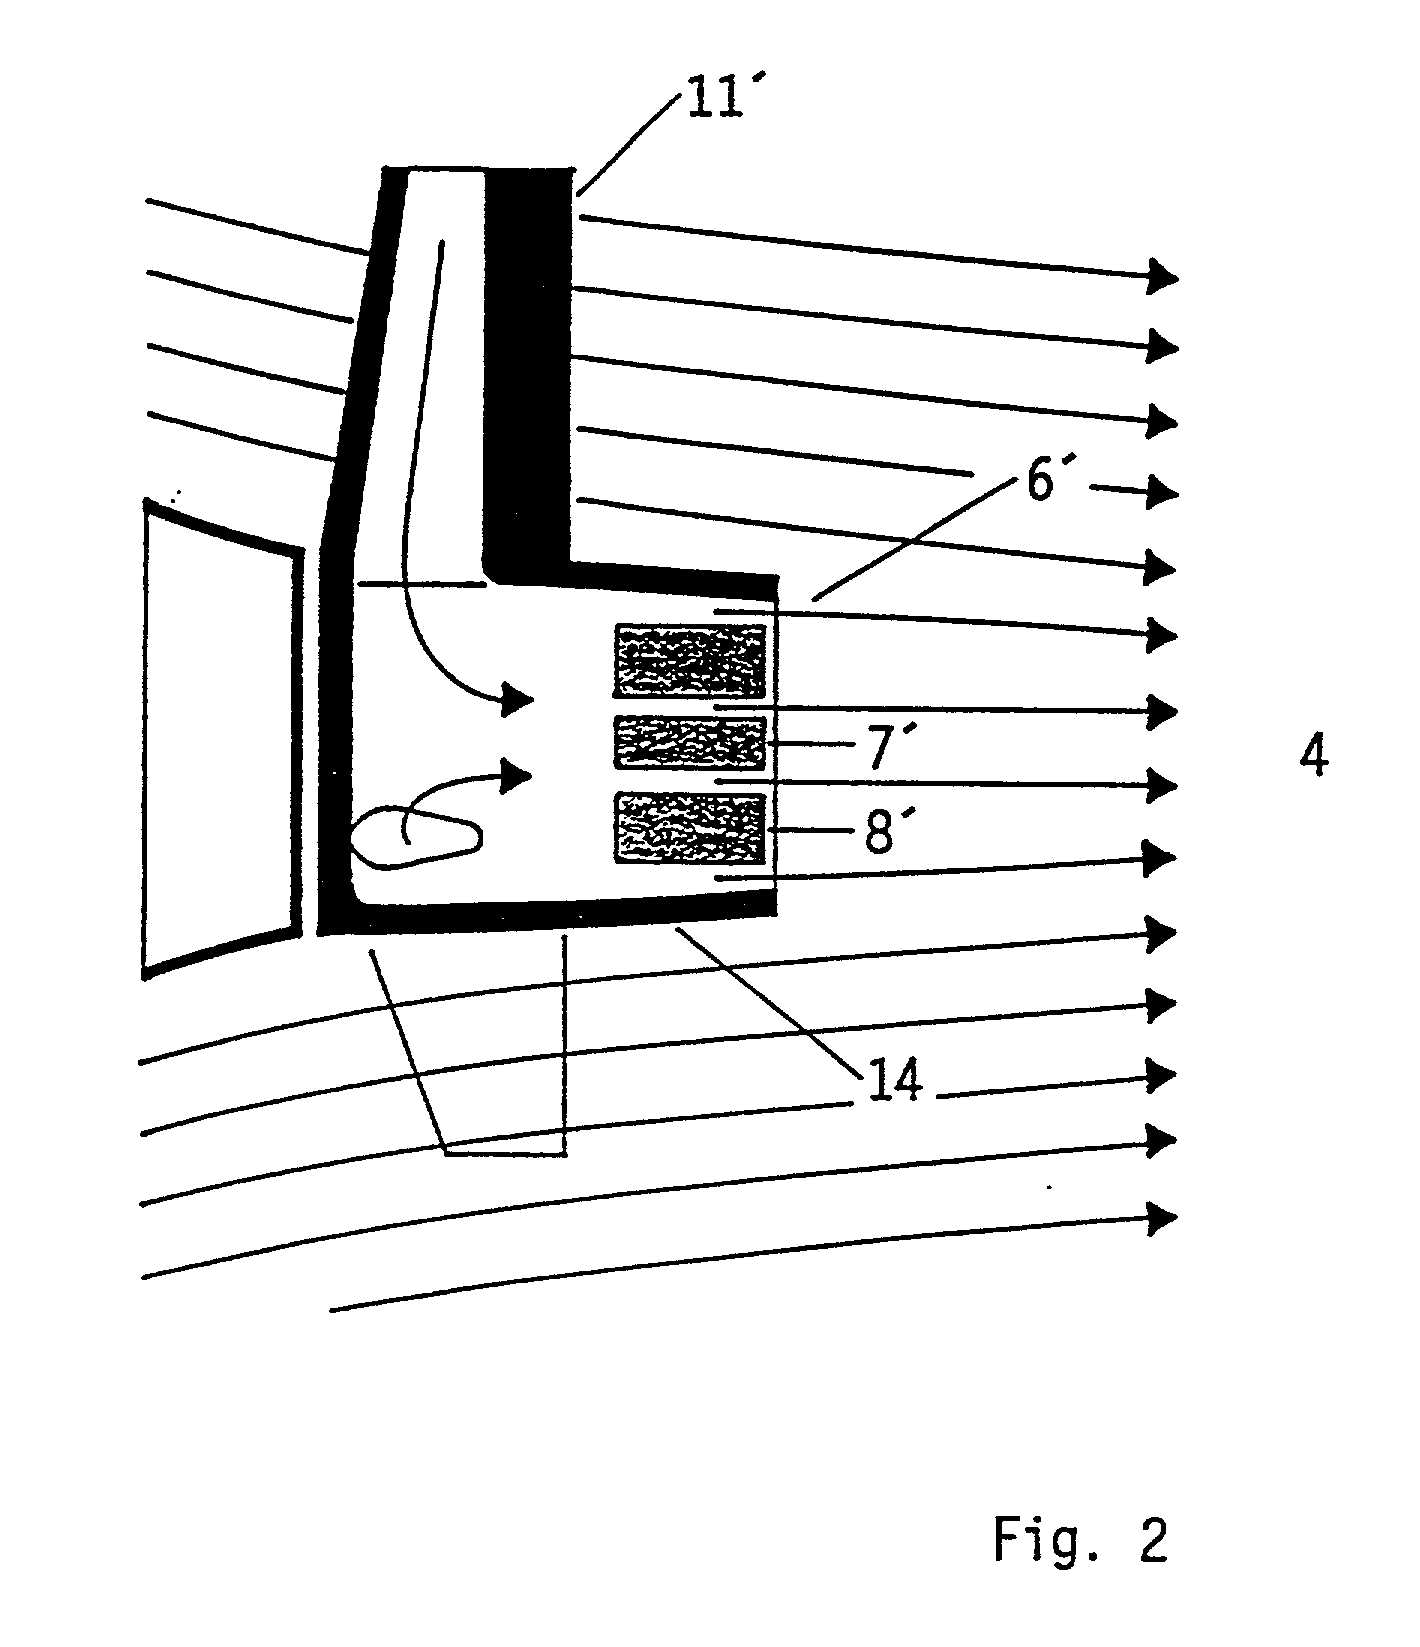 Apparatus and method for active reduction of the noise emission from jet engines and for jet engine diagnosis